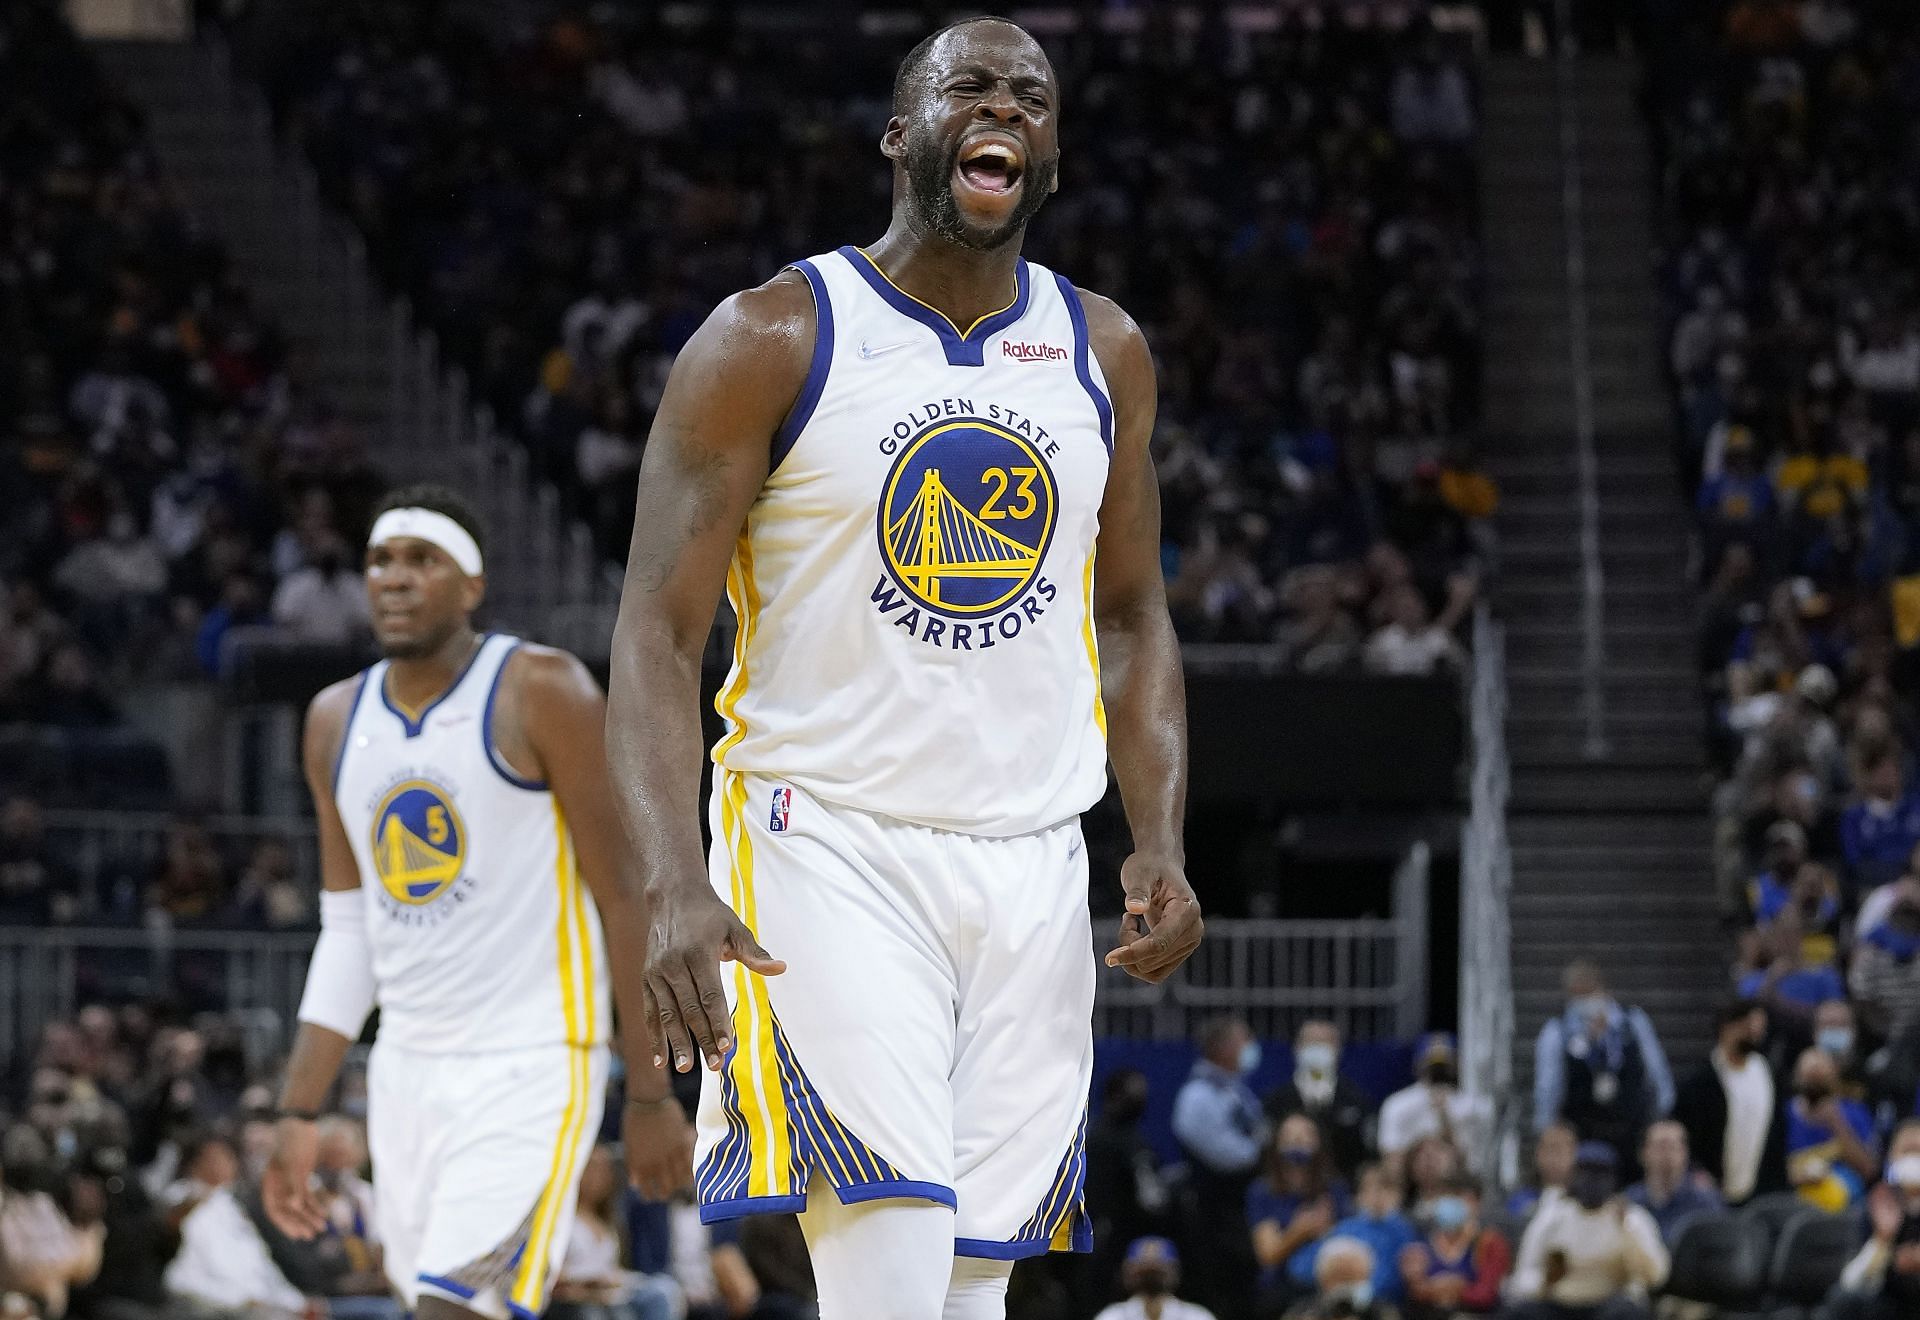 Draymond Green #23 of the Golden State Warriors reacts after scoring against the Portland Trail Blazers during the second half of their game at Chase Center on October 15, 2021 in San Francisco, California.